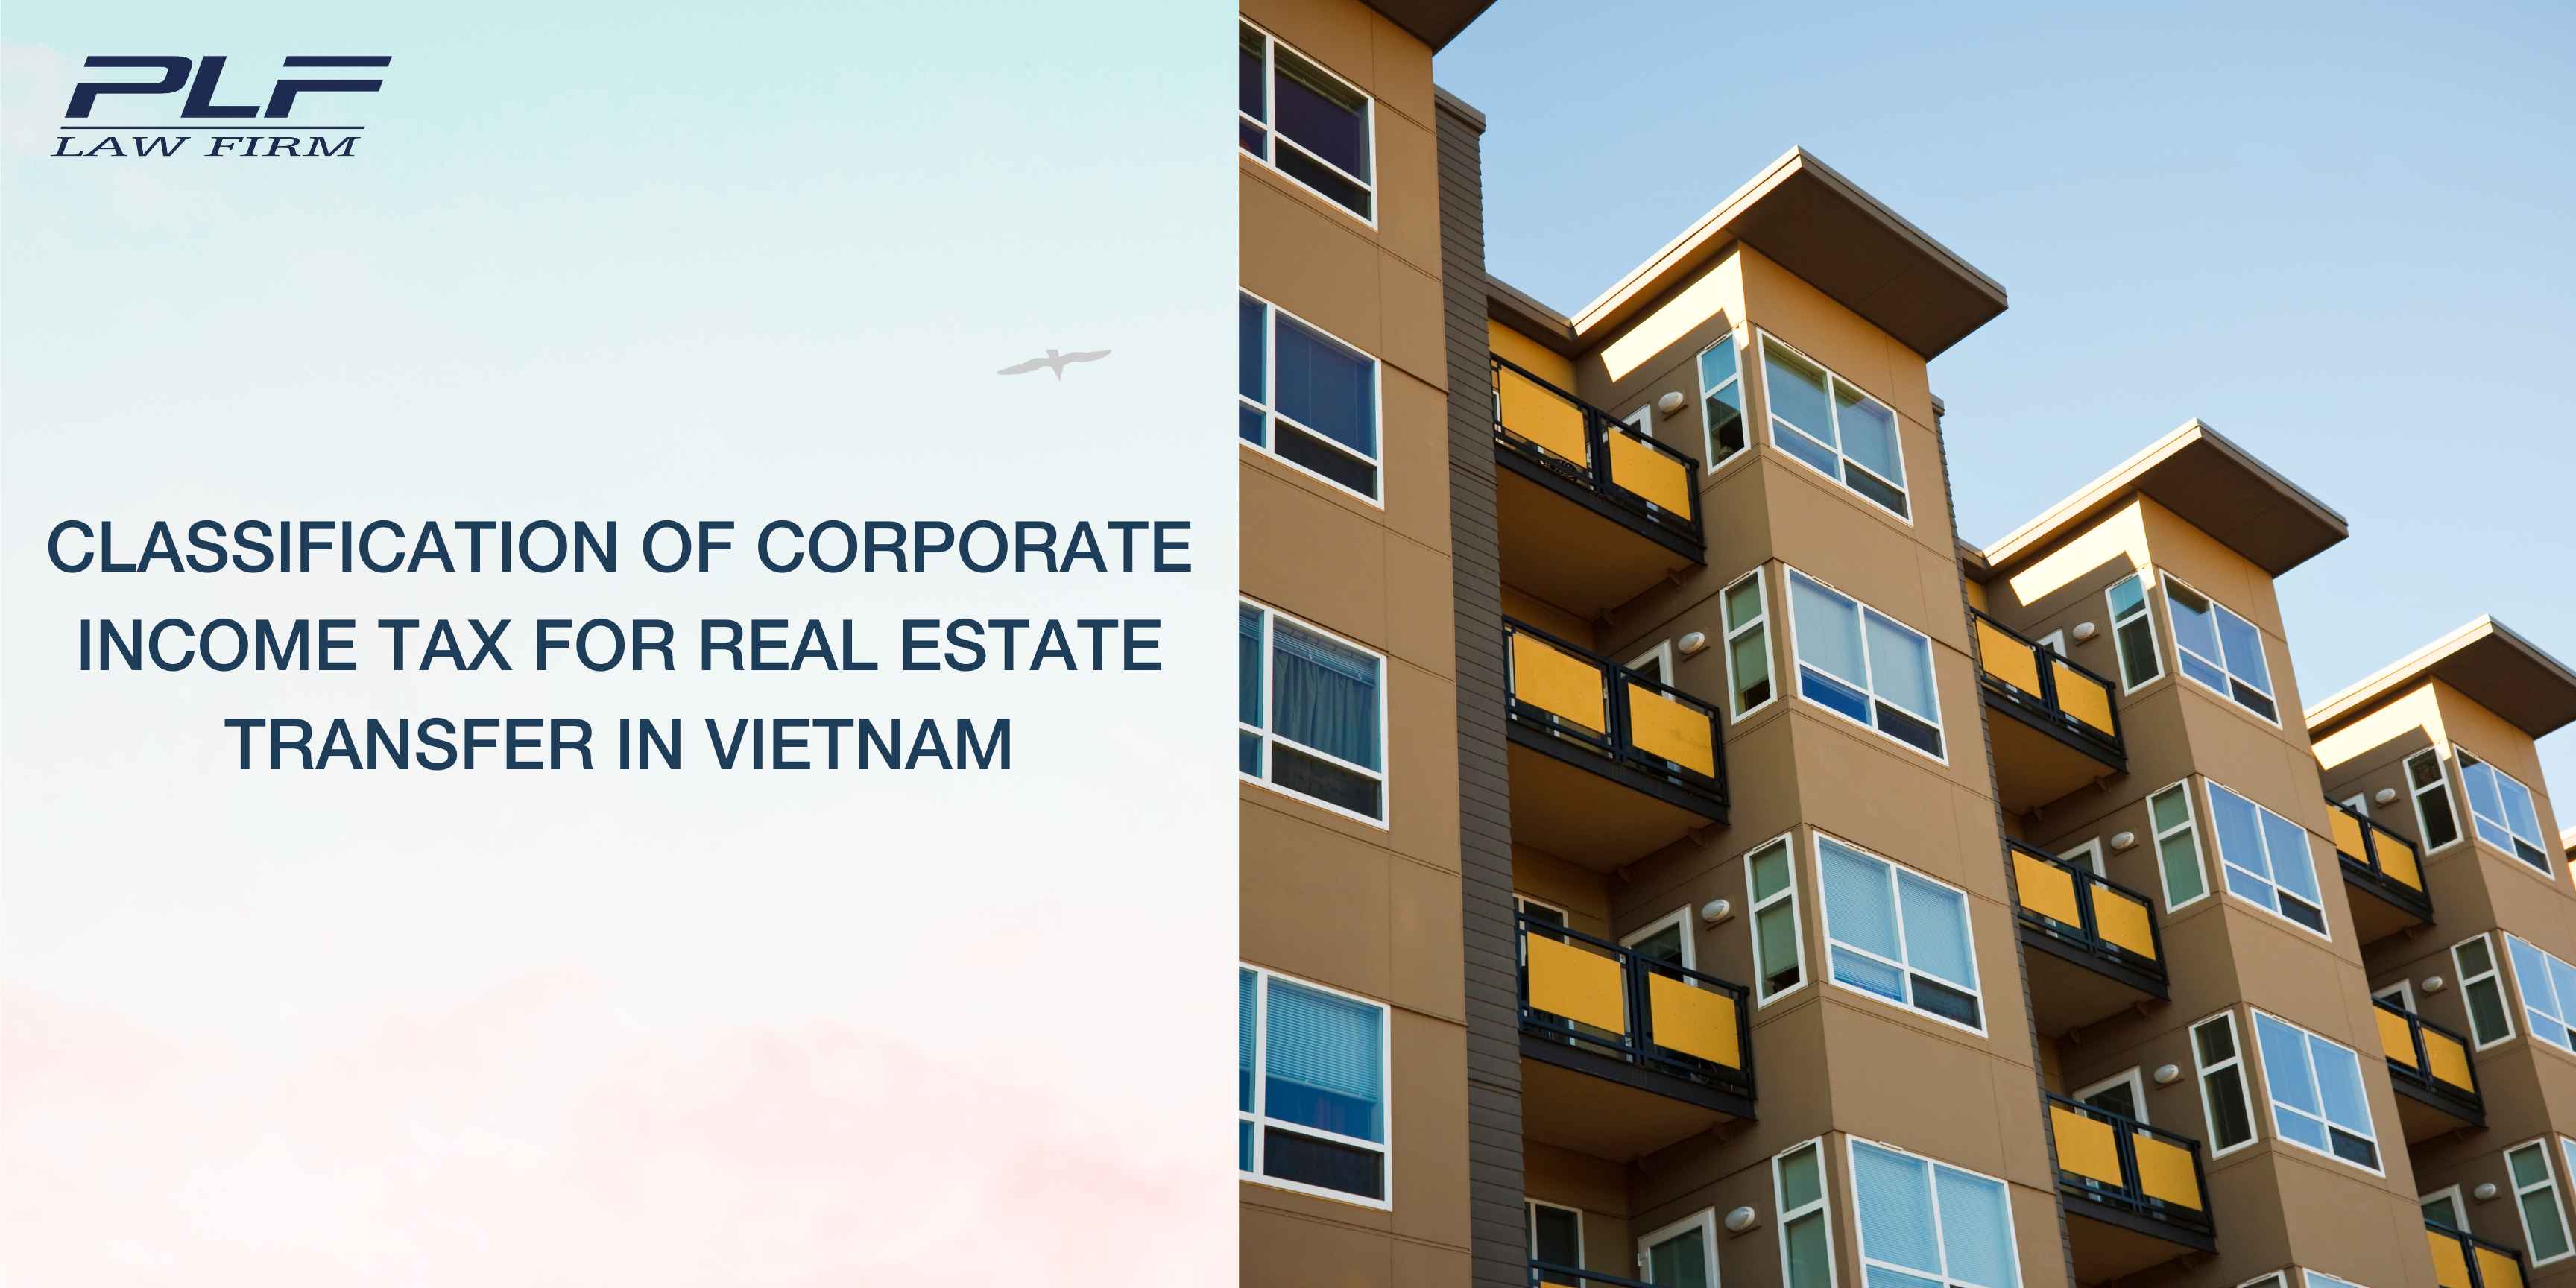 Plf Classification Of Corporate Income Tax For Real Estate Transfer In Vietnam